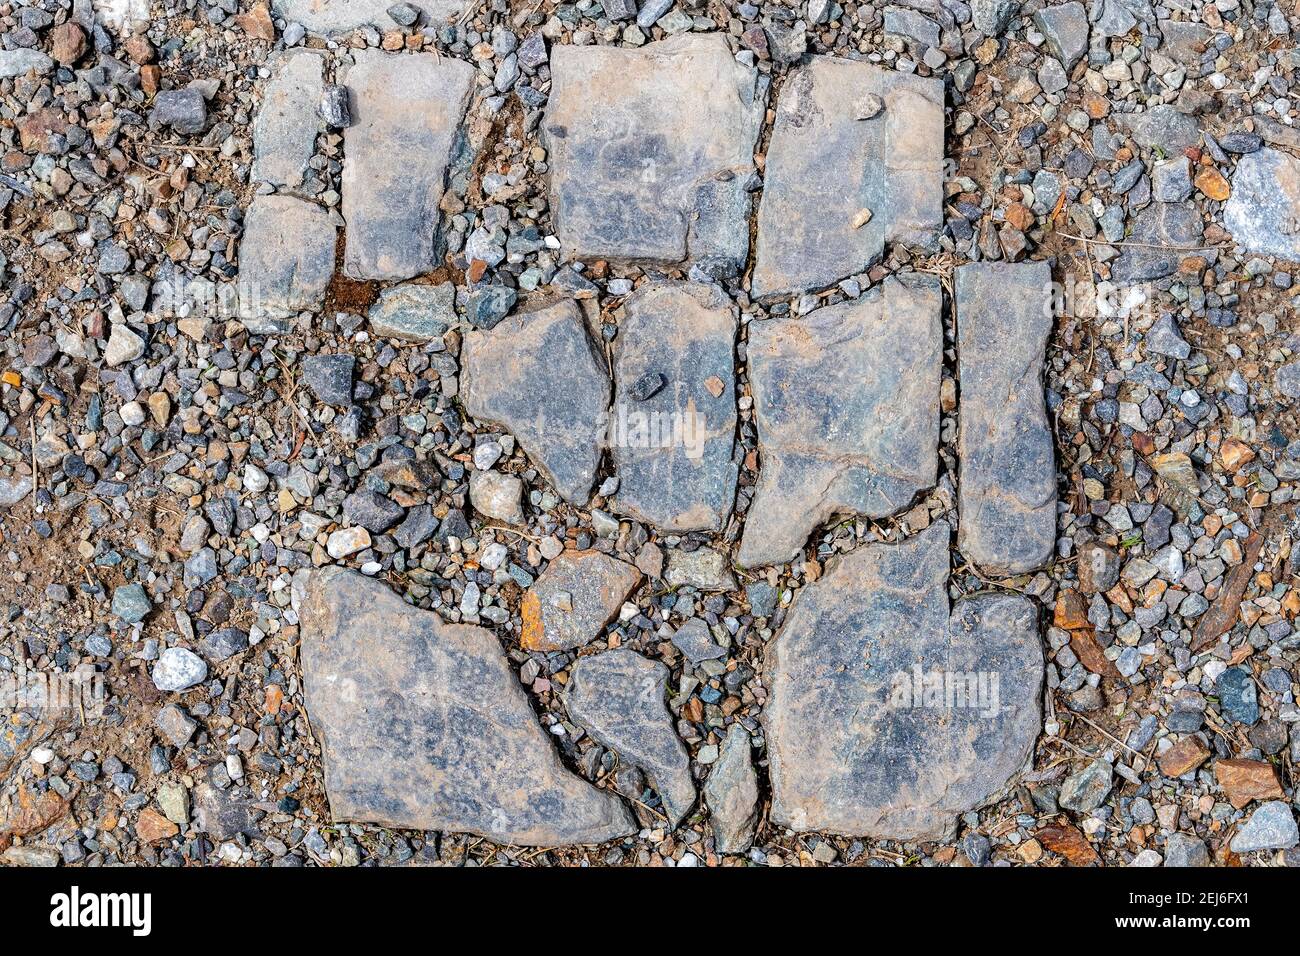 A dirty broken stone tile on gravel. The tile is arranged to it is obvious how it fit together before it was broken. Some bits missing. Stock Photo